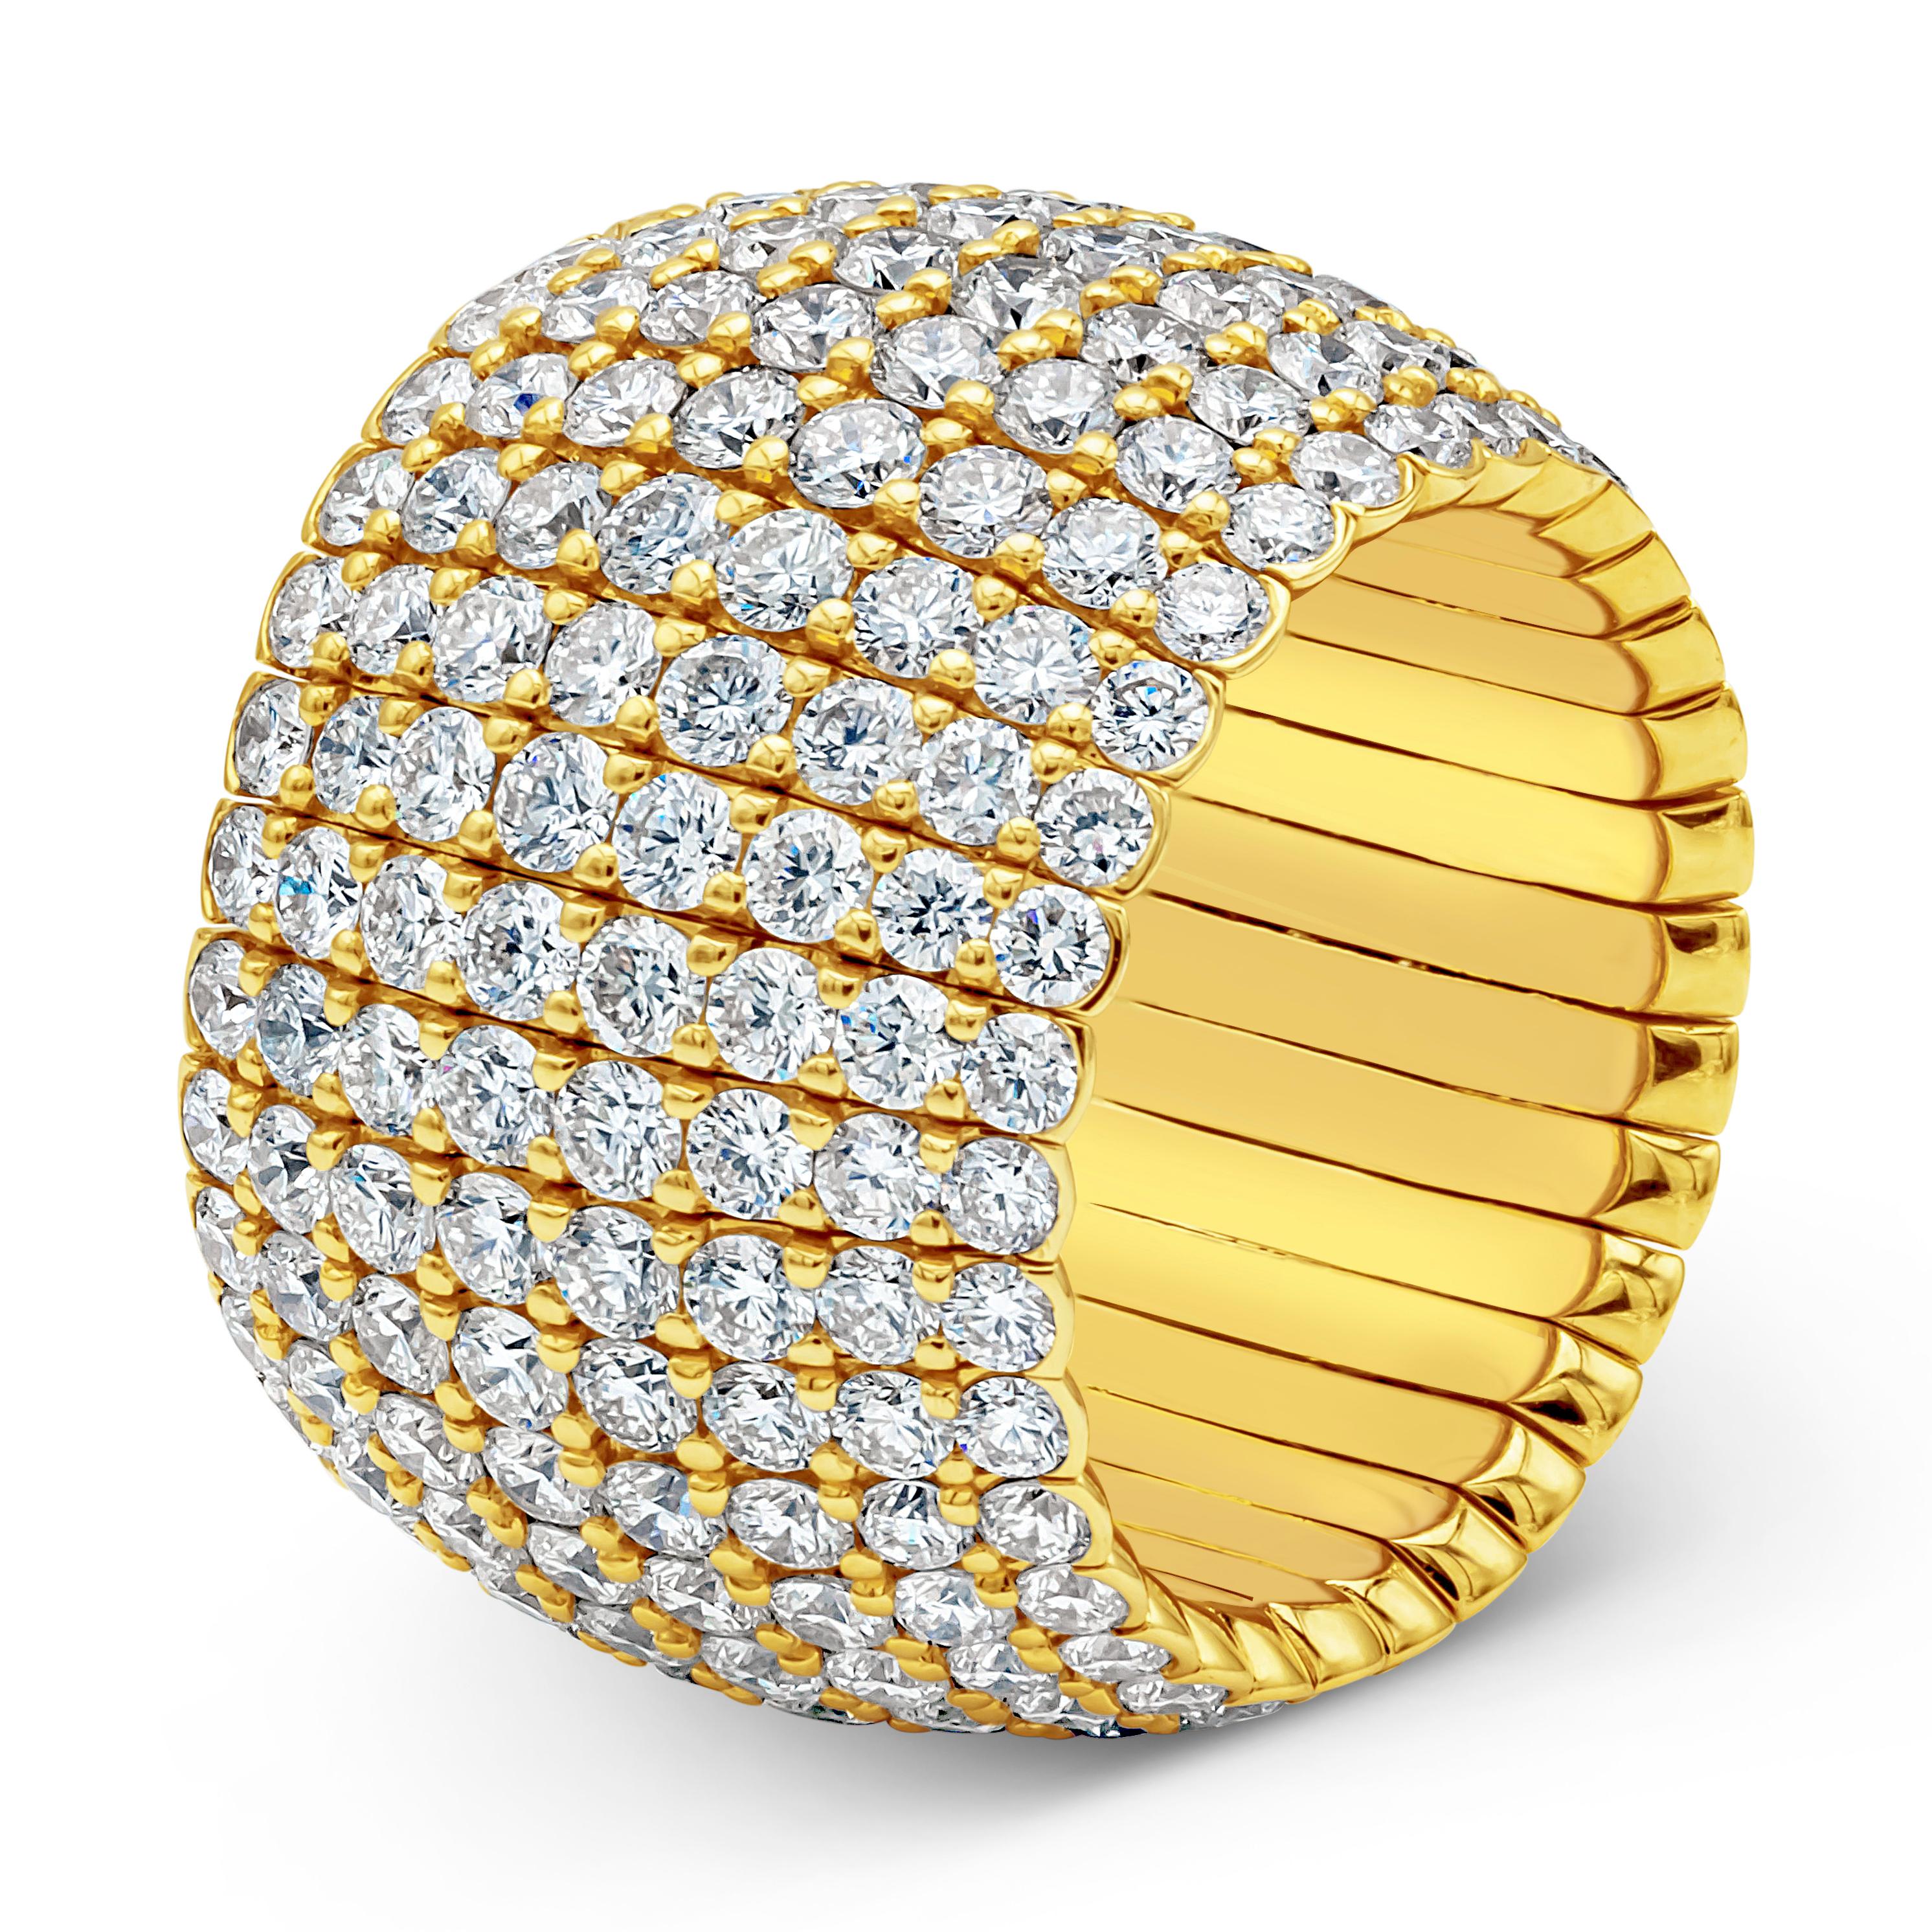 This stylish and stunning flexible fashion ring showcases eight rows of 256 brilliant round cut diamonds weighing 8.11 carats total, set in a beautiful micro-pave set and share prong setting. Finely made in 18k yellow gold. Size 6.5 US resizable